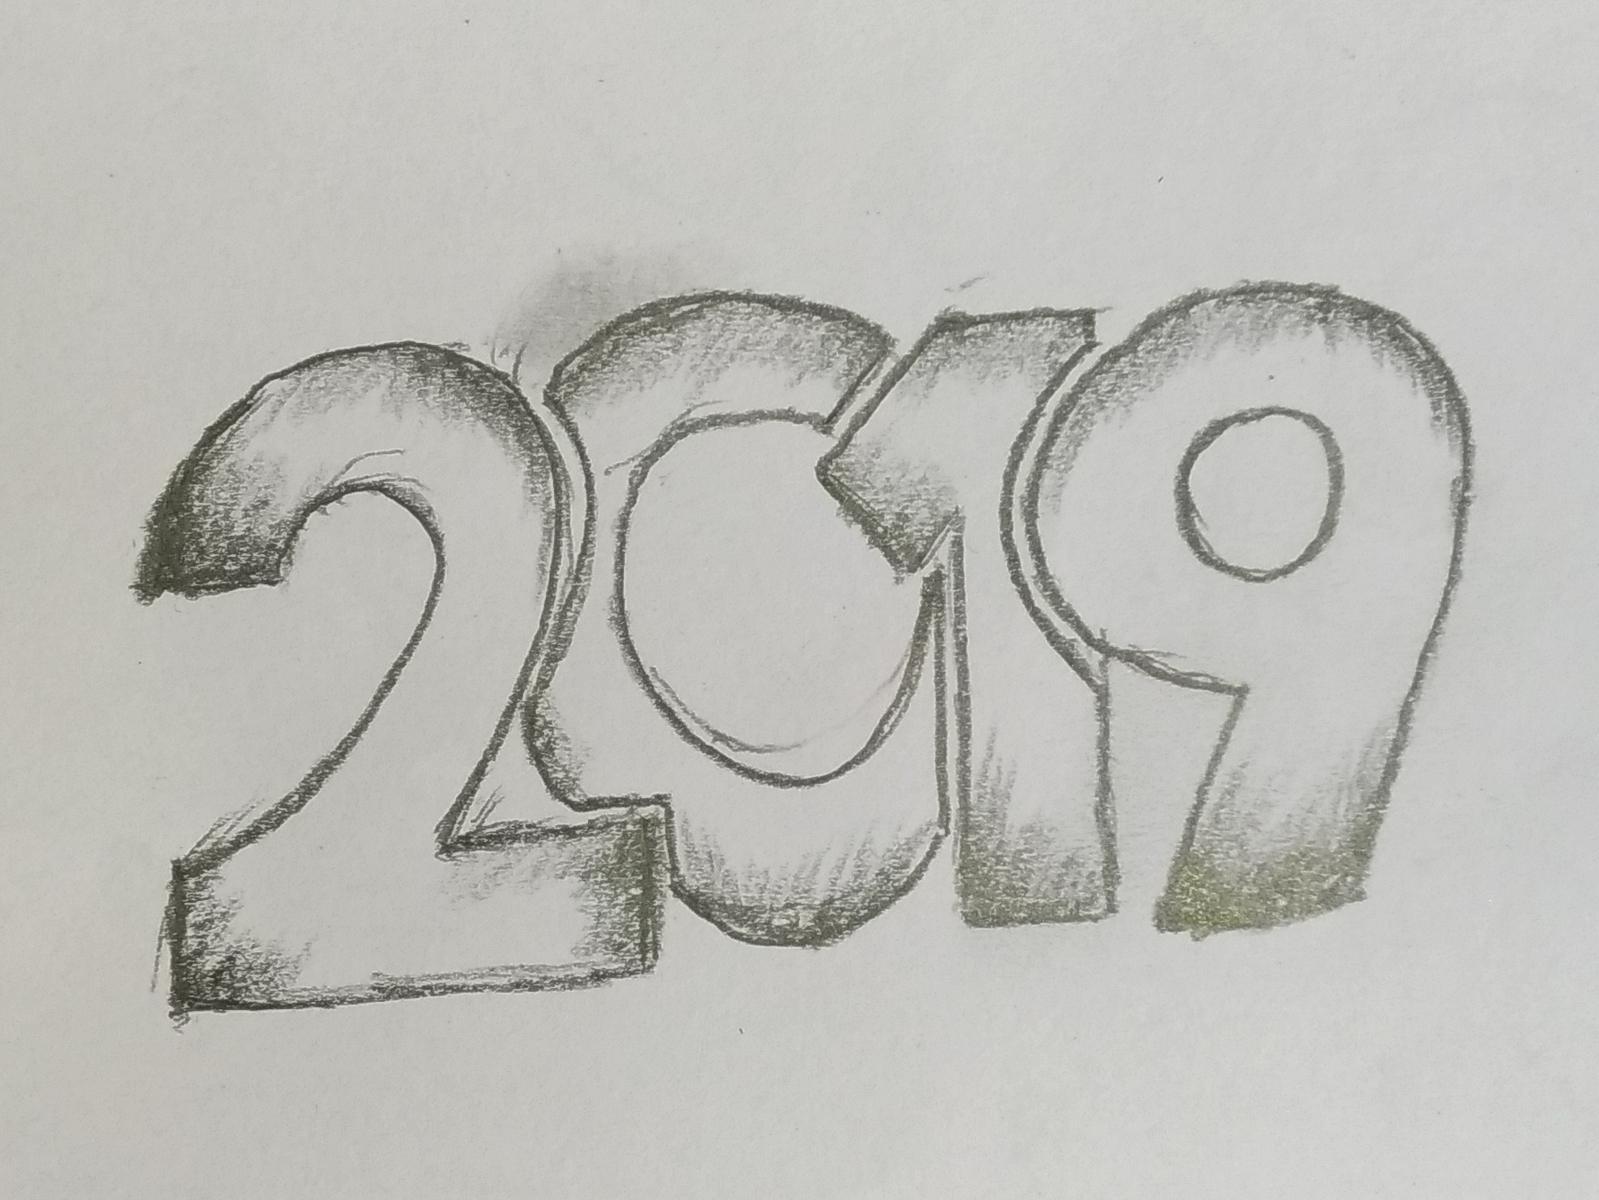 81119 New Year Sketch Drawing Doodles Images Stock Photos  Vectors   Shutterstock